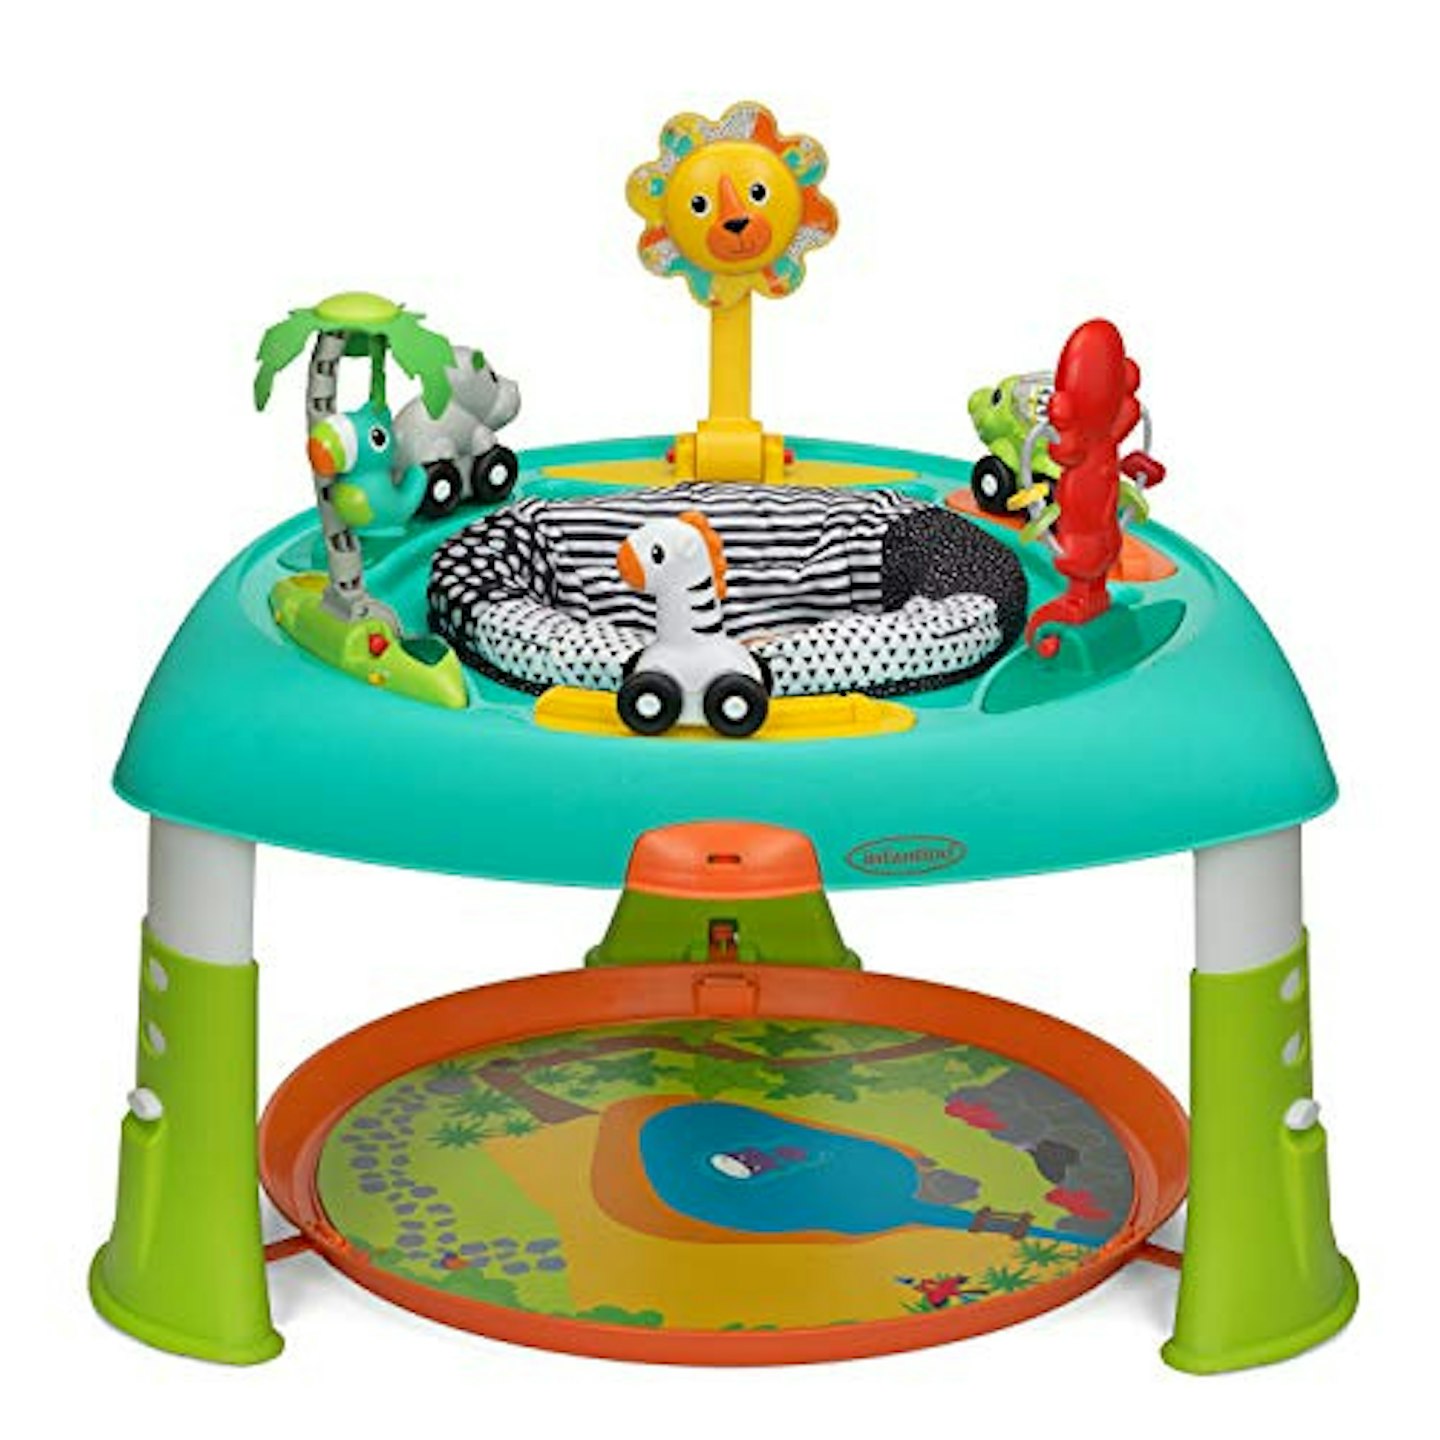 Infantino Sit, Spin u0026amp; Stand Entertainer 360 Seat u0026amp; Activity Table